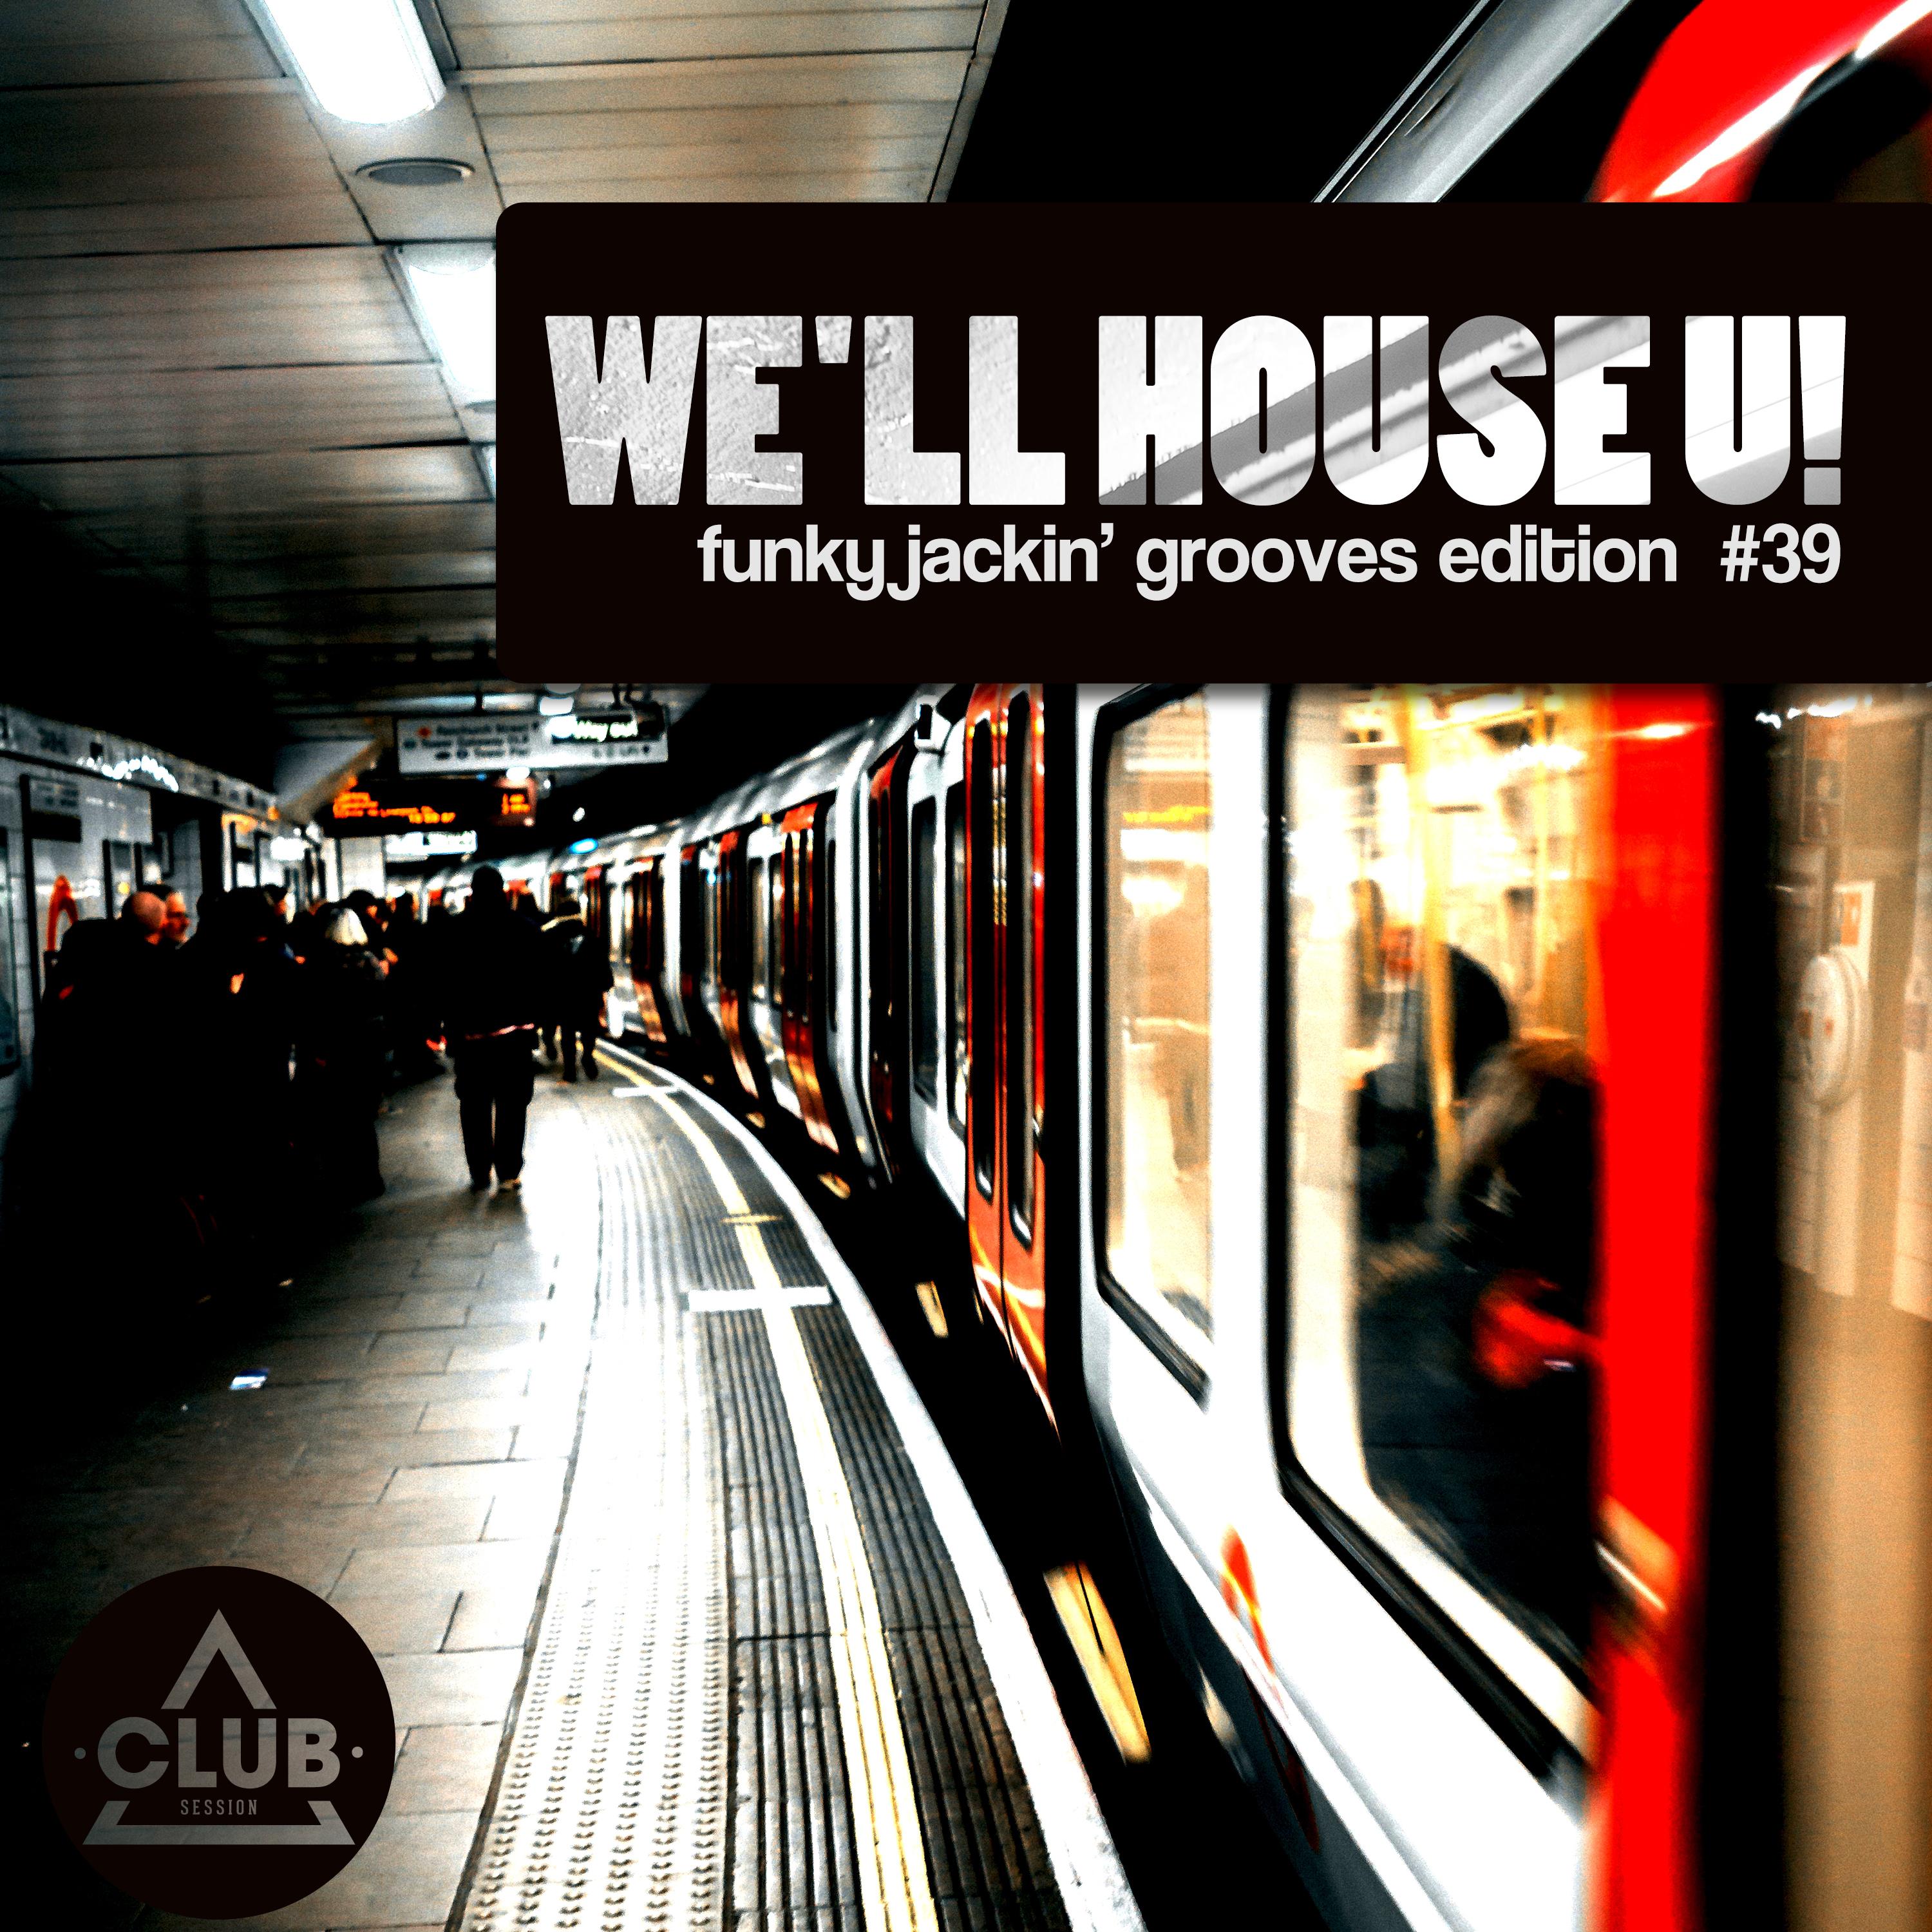 We'll House U! - Funky Jackin' Grooves Edition, Vol. 39